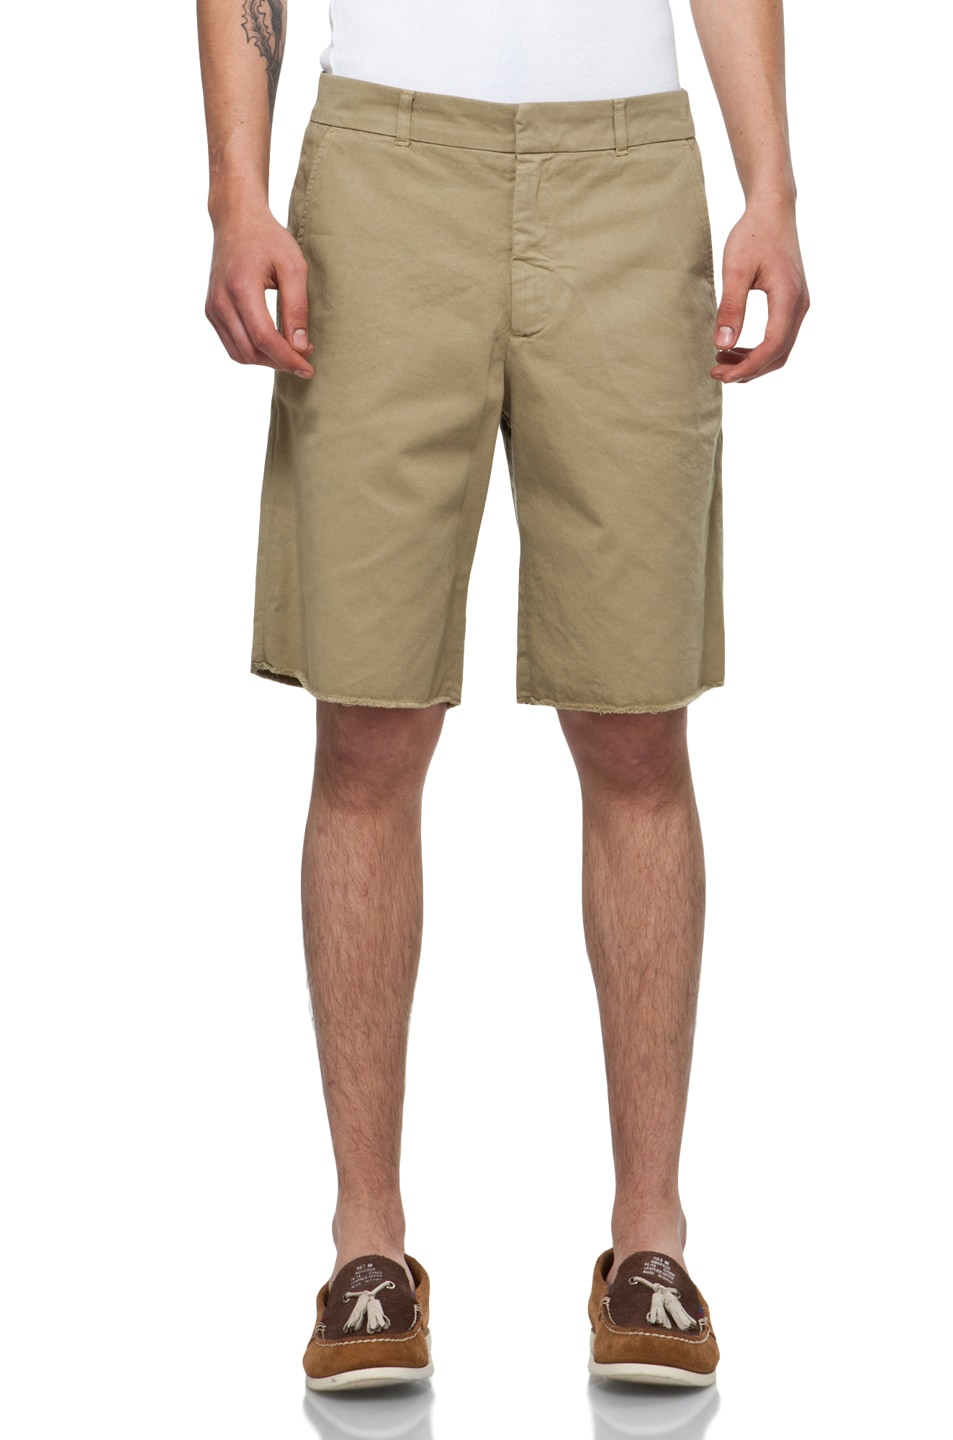 Image 1 of Band of Outsiders Cut Off Chino Shorts in Khaki Cotton Chino